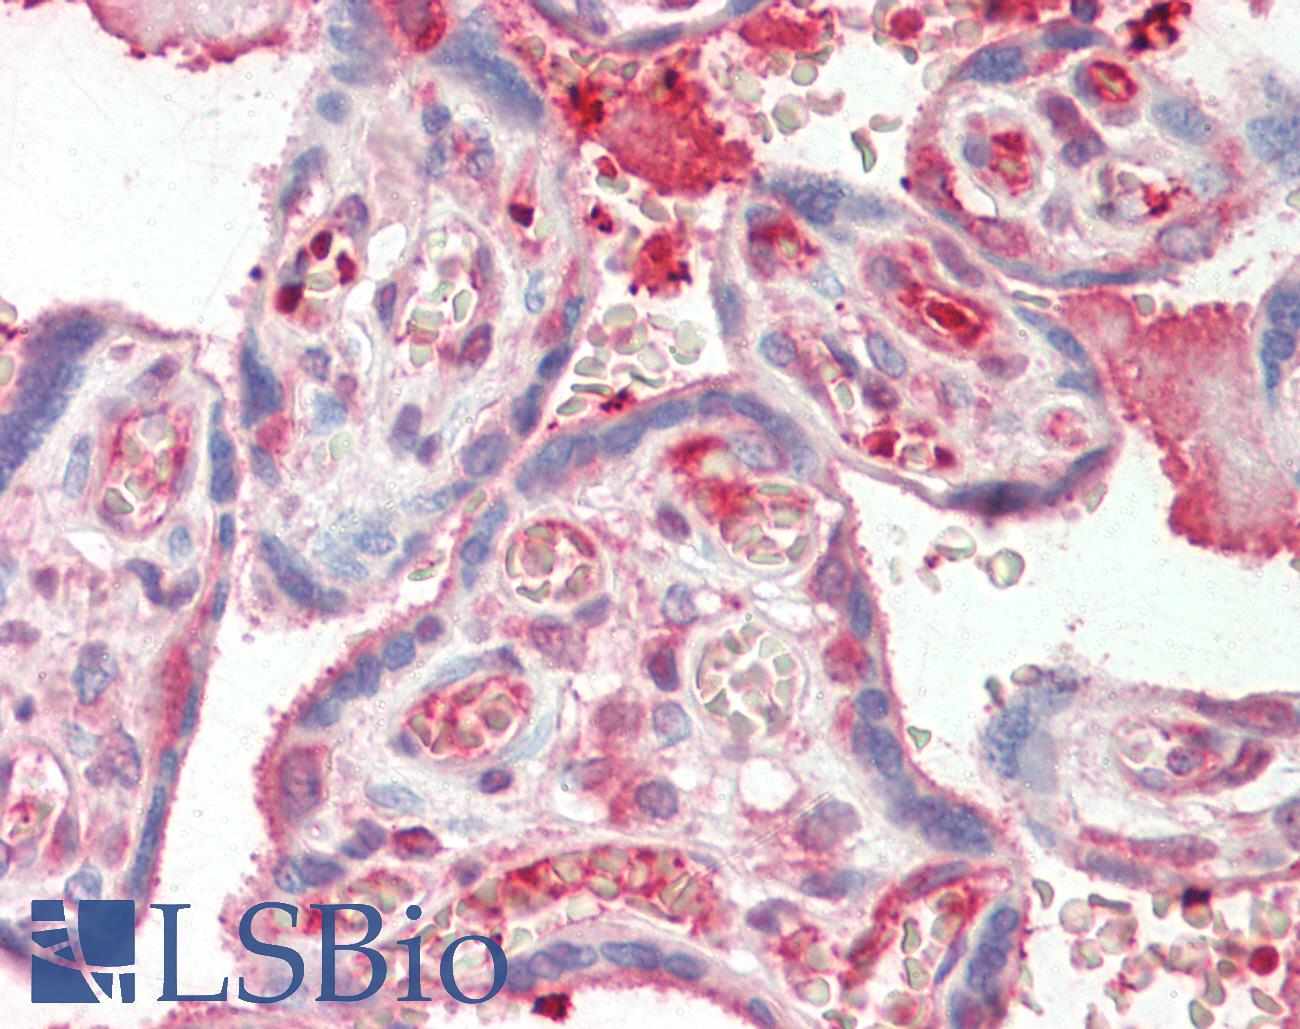 SDC1 / Syndecan 1 / CD138 Antibody - Anti-SDC1 / Syndecan 1 / CD138 antibody IHC staining of human placenta. Immunohistochemistry of formalin-fixed, paraffin-embedded tissue after heat-induced antigen retrieval. Antibody dilution 1:50.